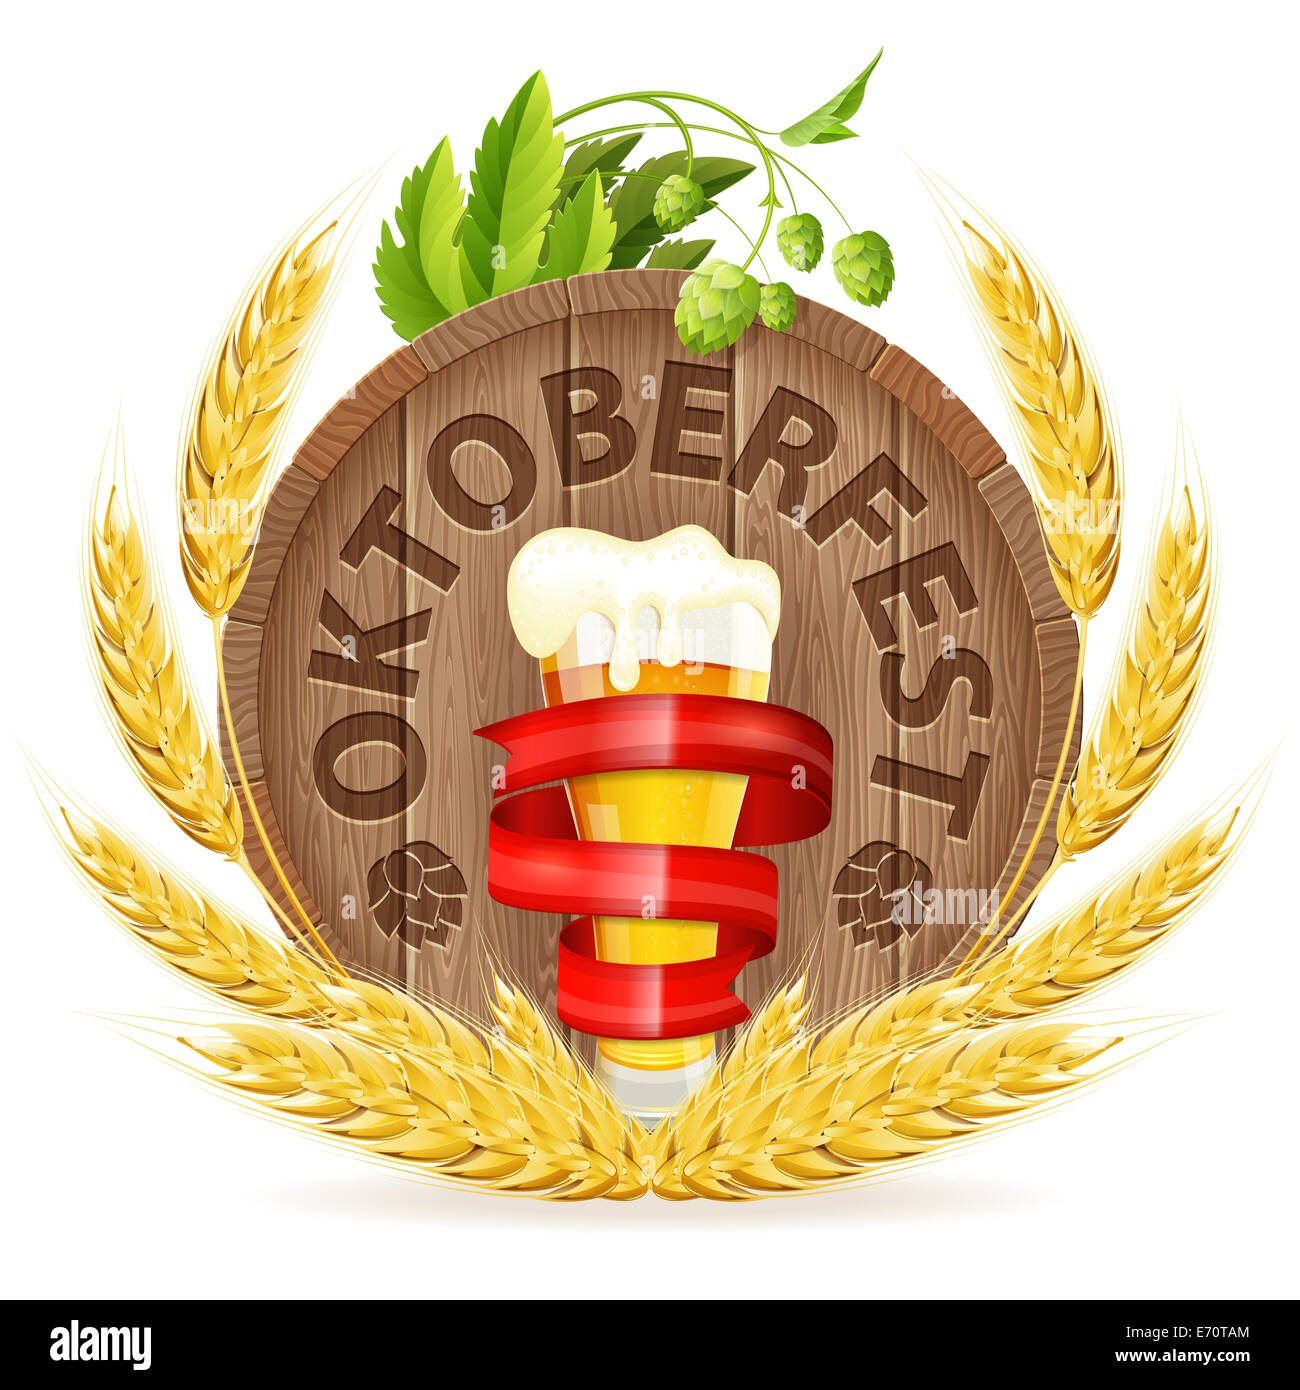 Oktoberfest Poster with Barrel, Glass of Beer, Barley and Hops, isolated on white background Stock Photo